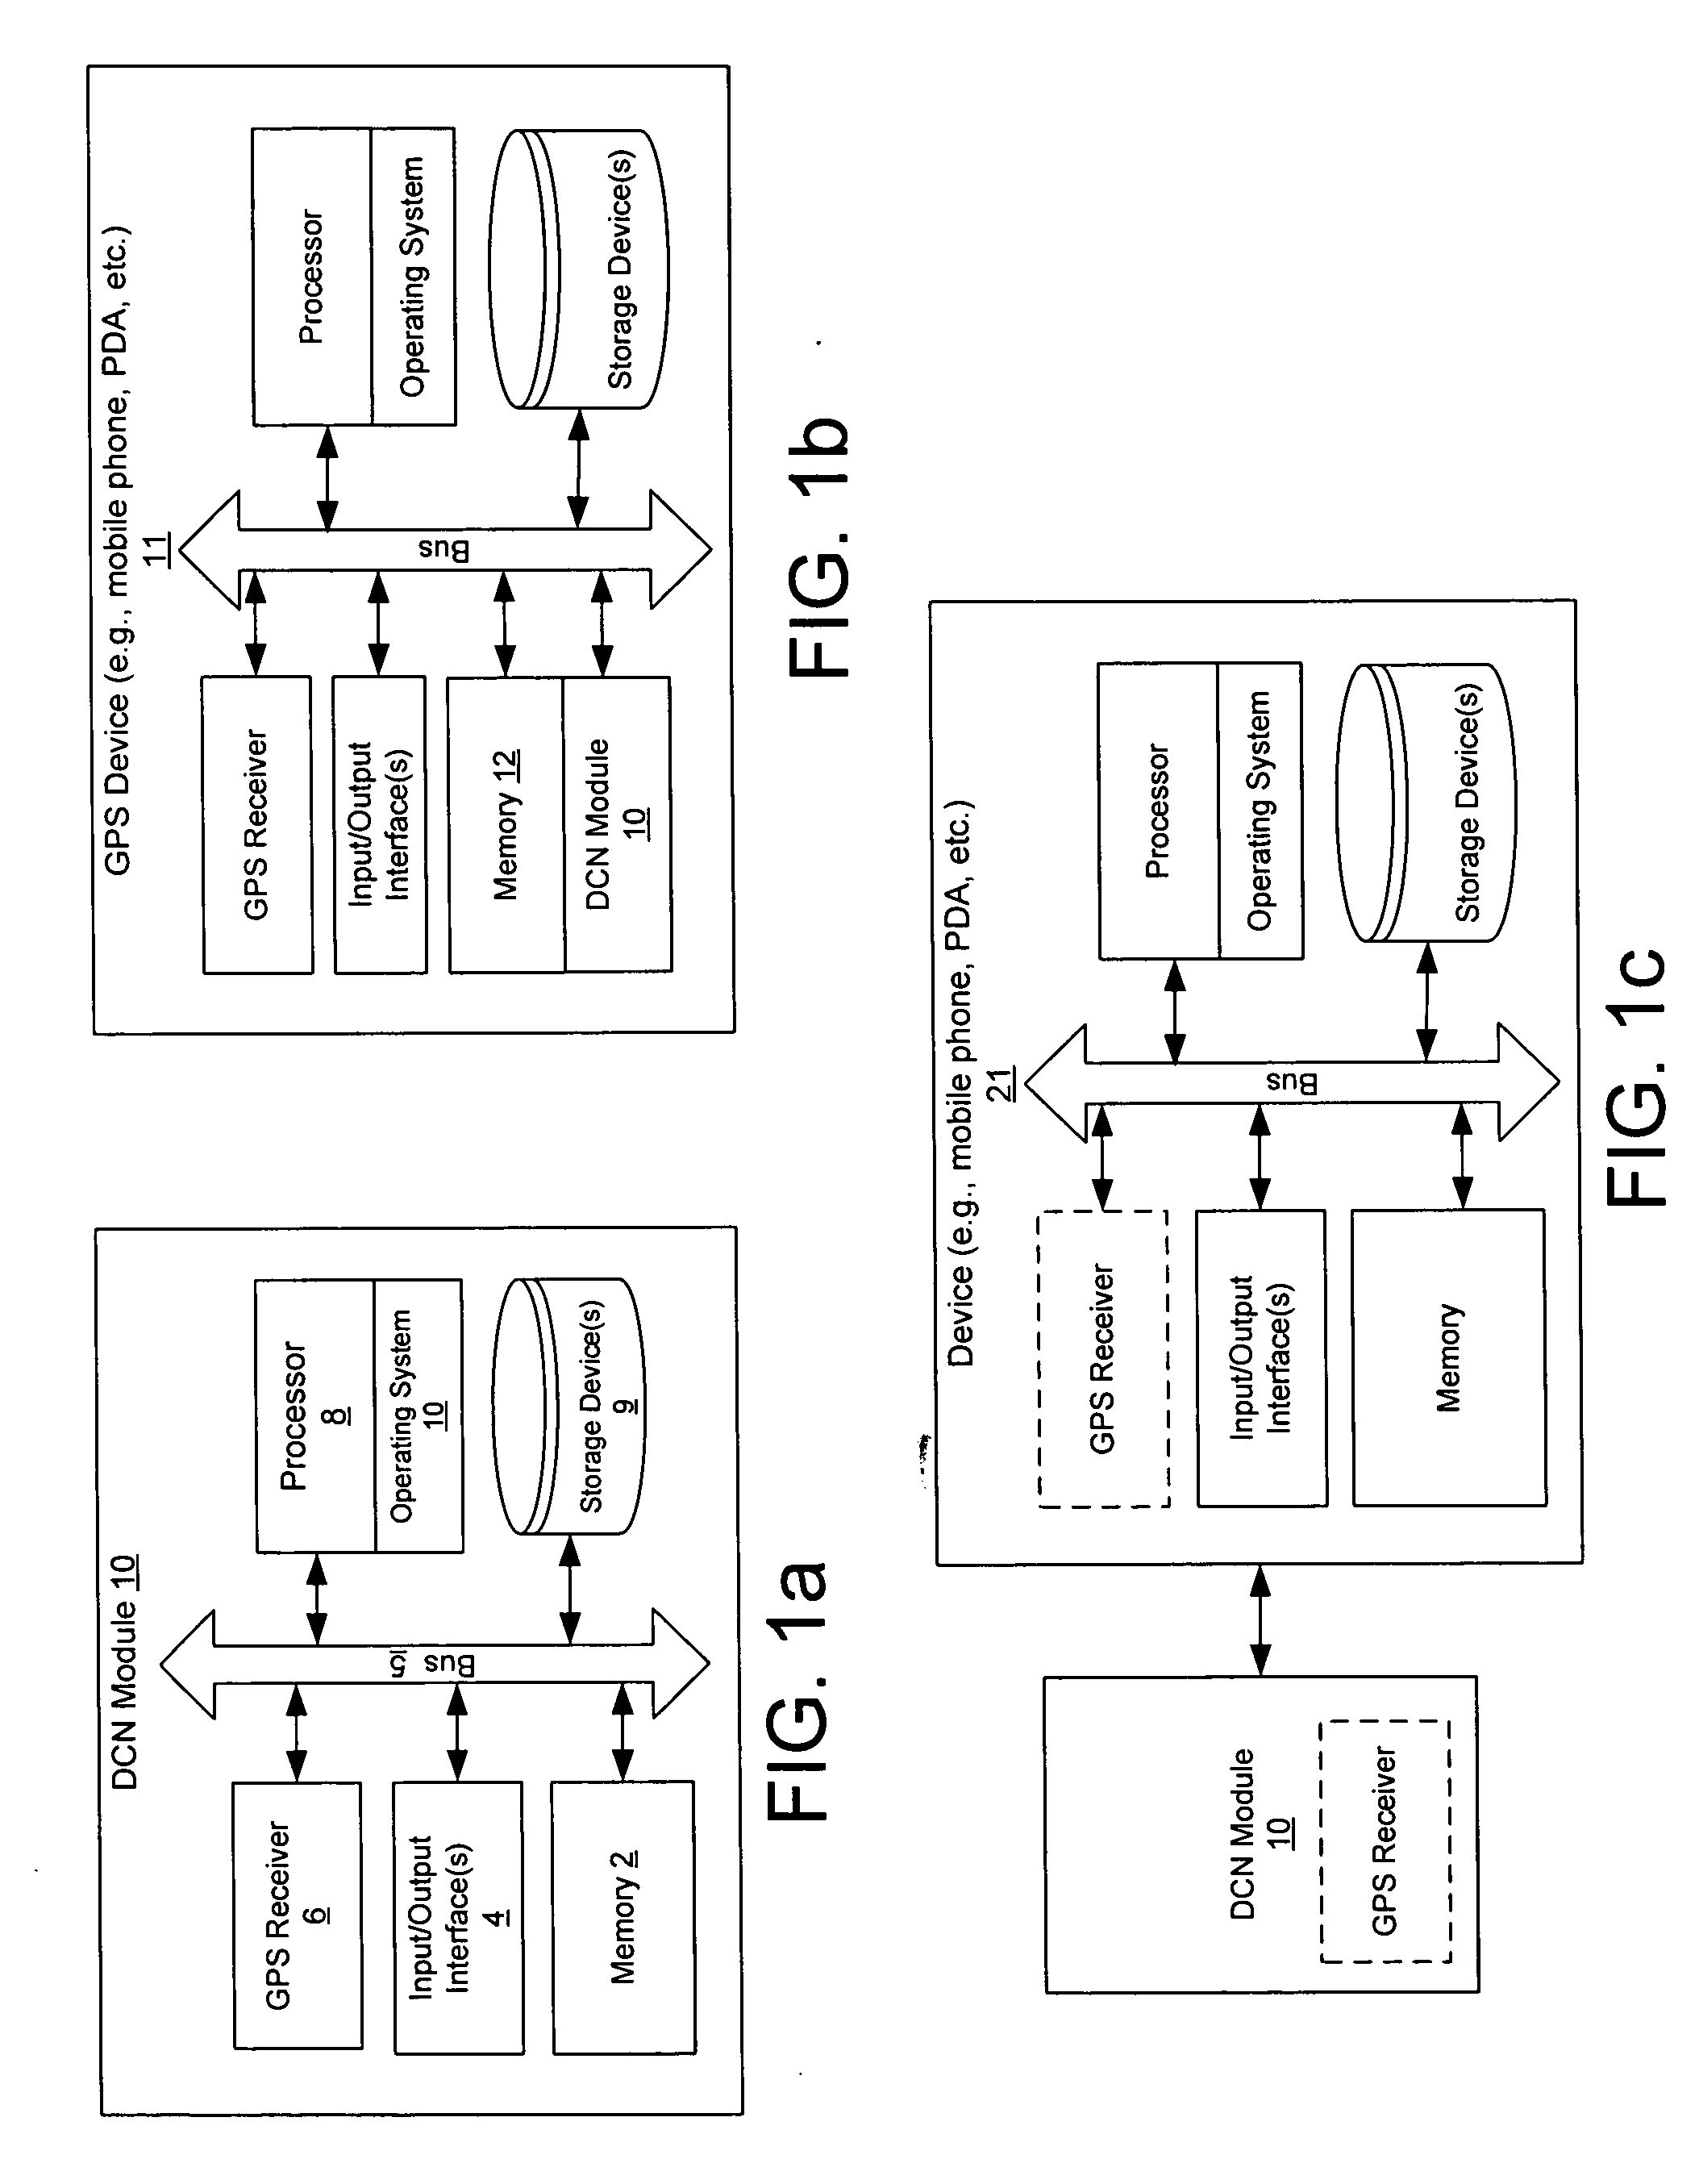 Systems, methods and apparatuses for continuous in-vehicle and pedestrian navigation